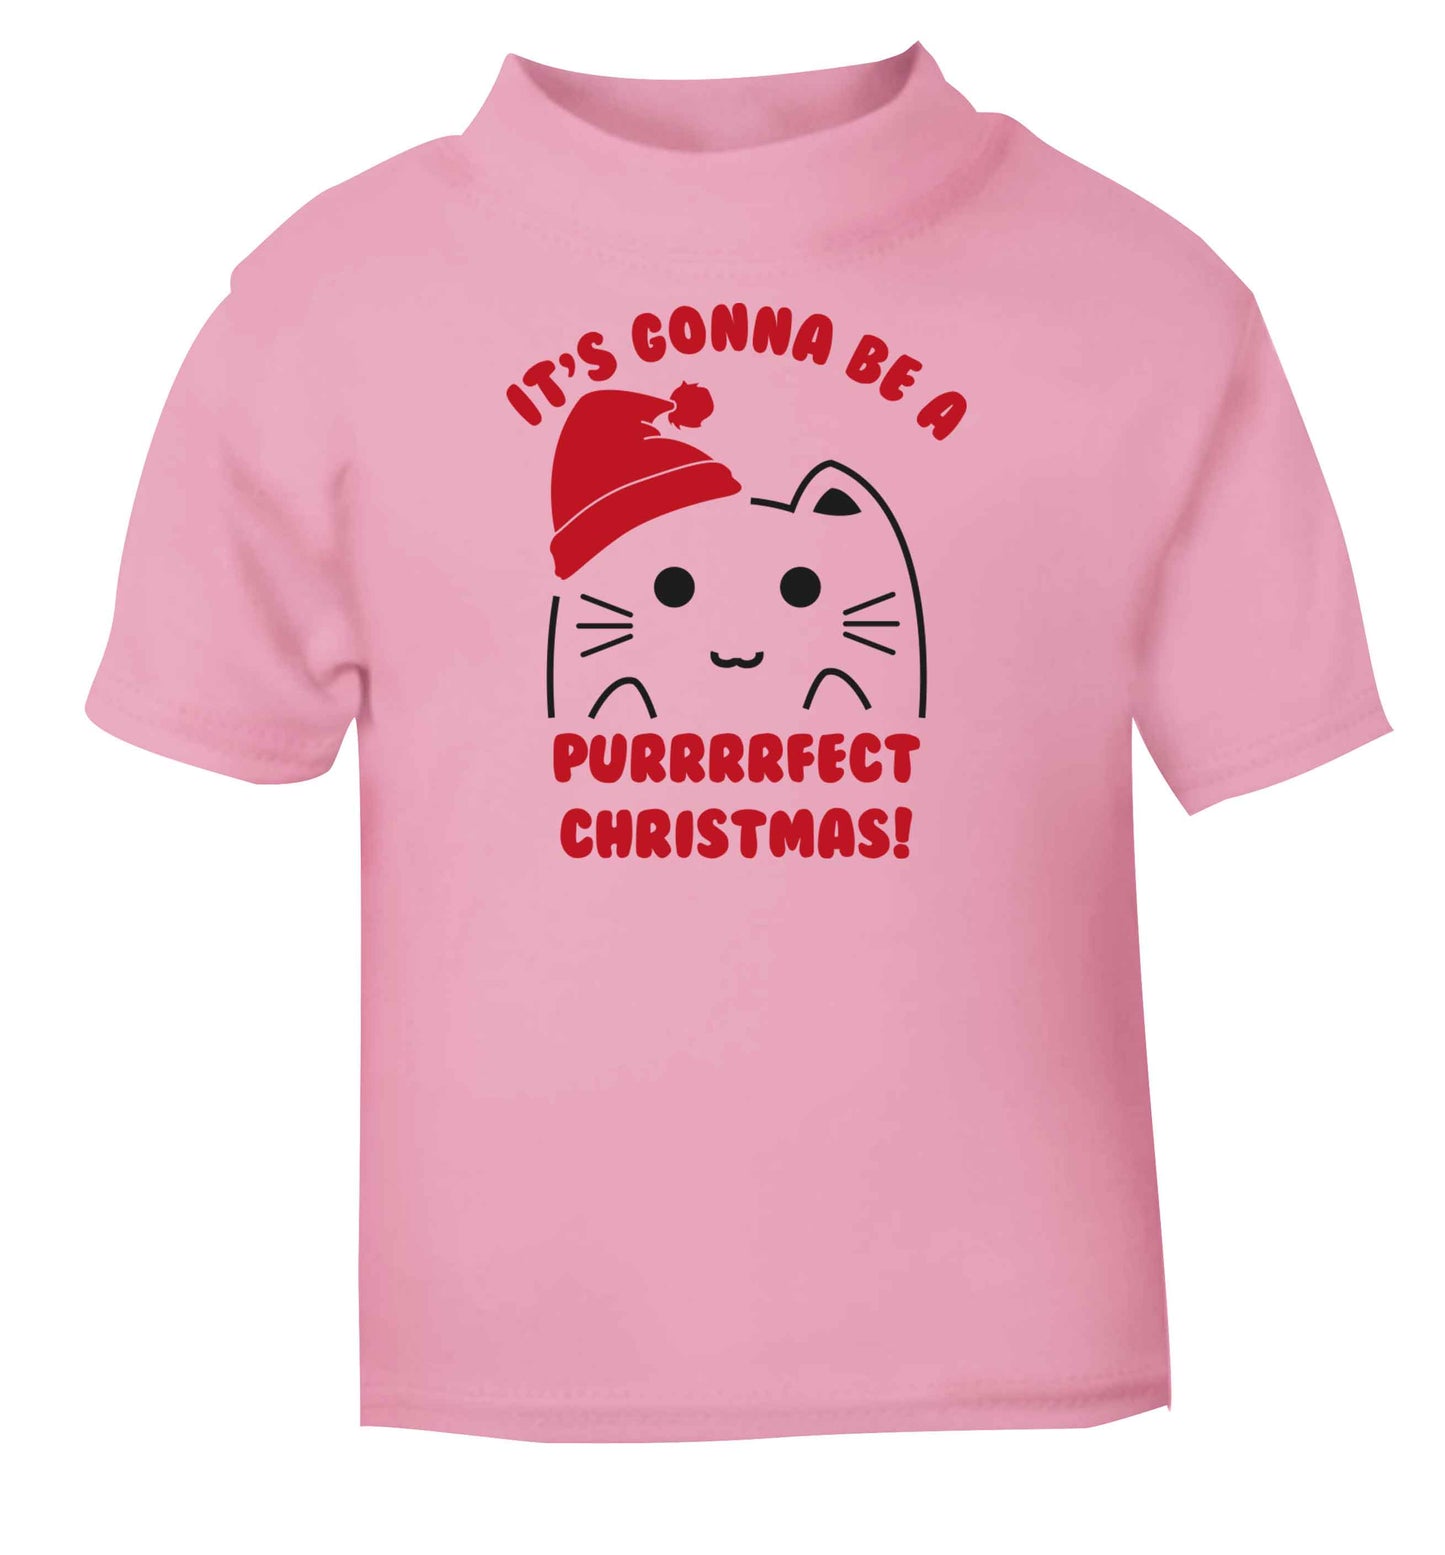 It's going to be a purrfect Christmas light pink baby toddler Tshirt 2 Years